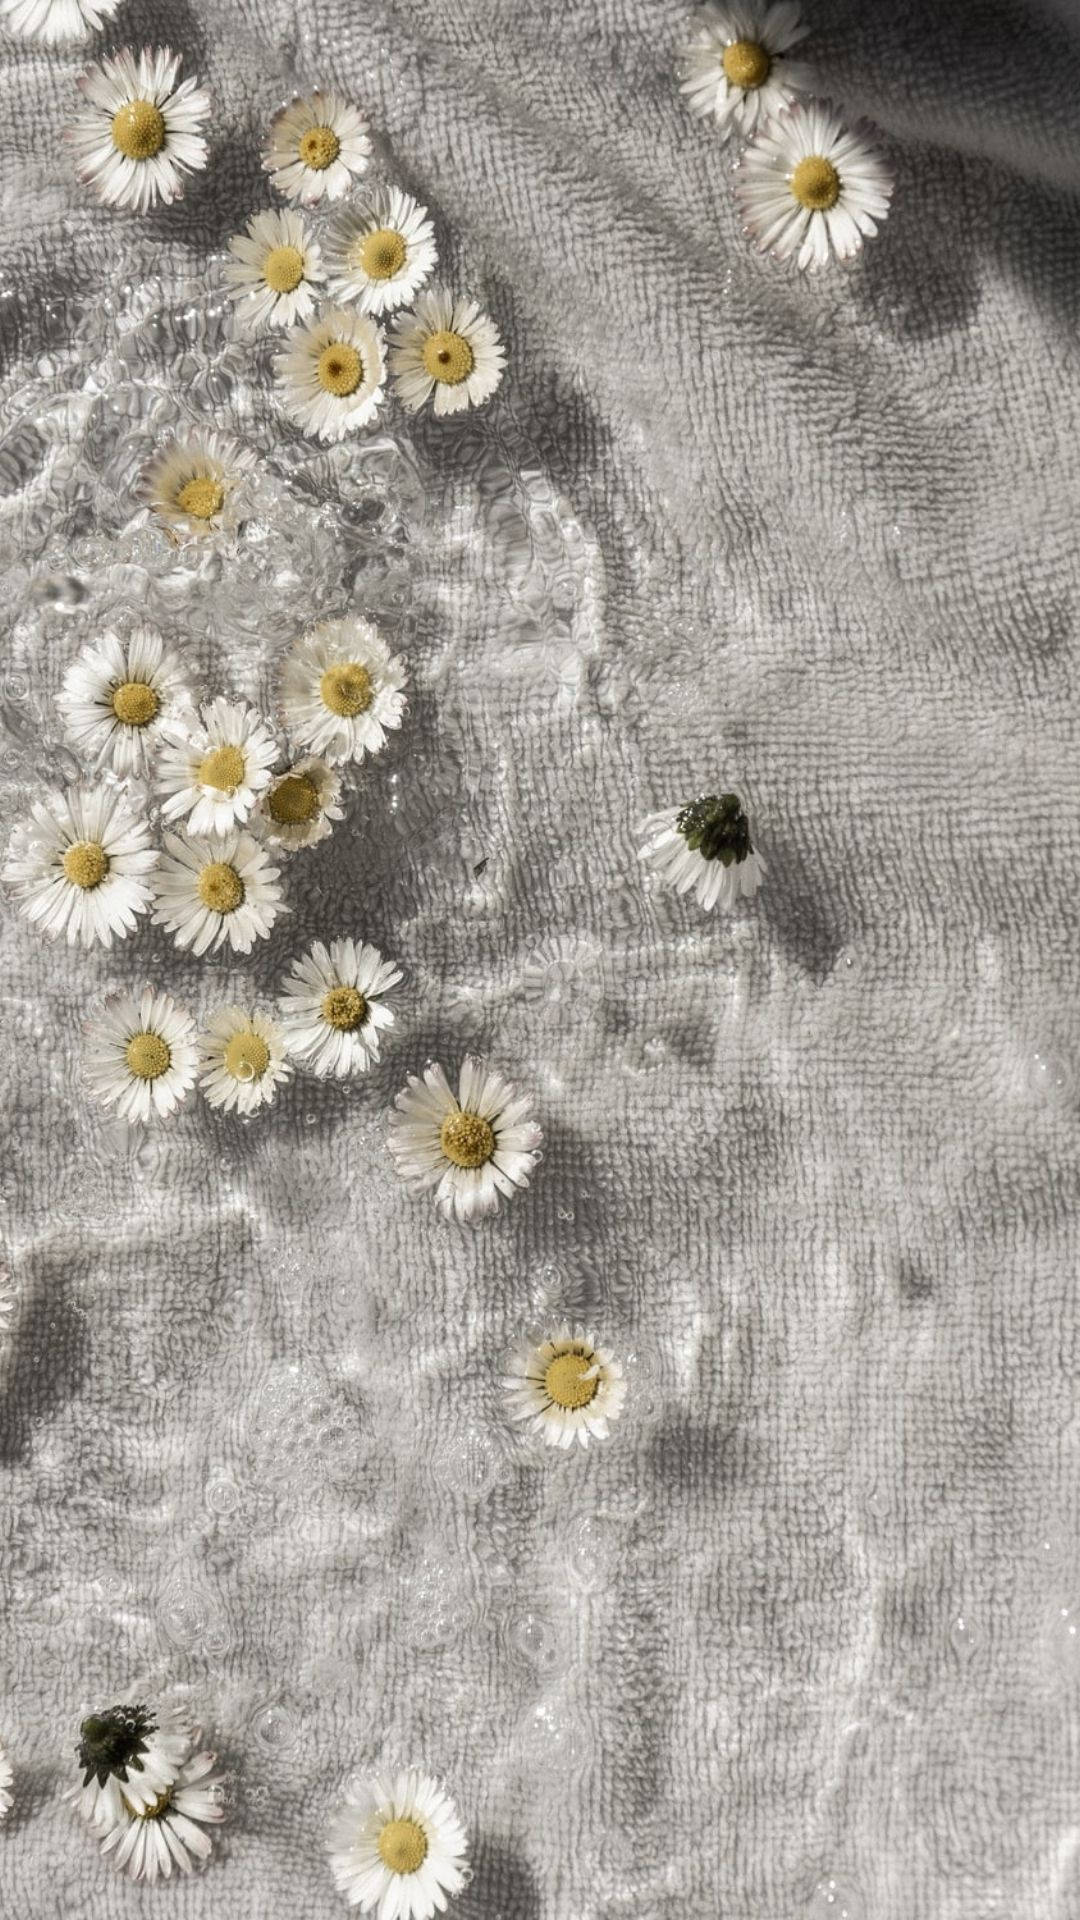 Flowers Aesthetic On Cloth